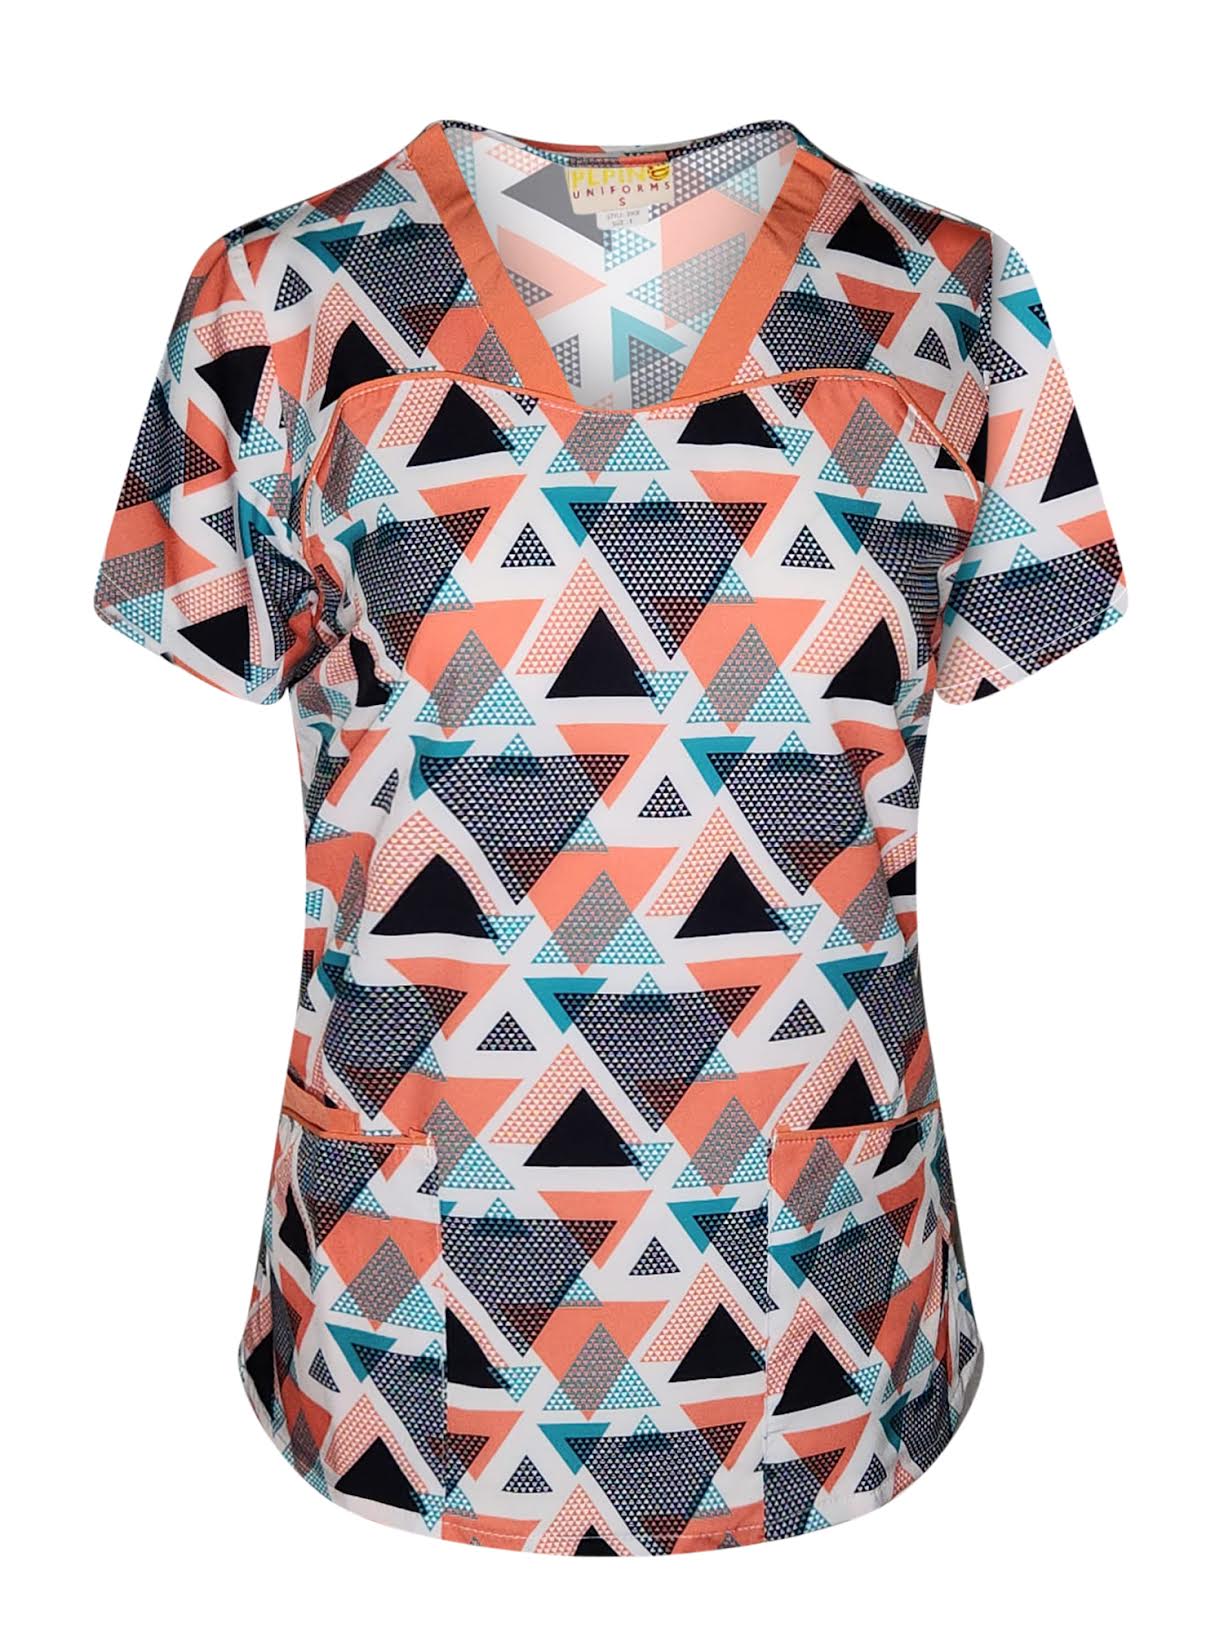 Pepino Uniforms Printed Orange Linked Triangles Piping V-Neck Top